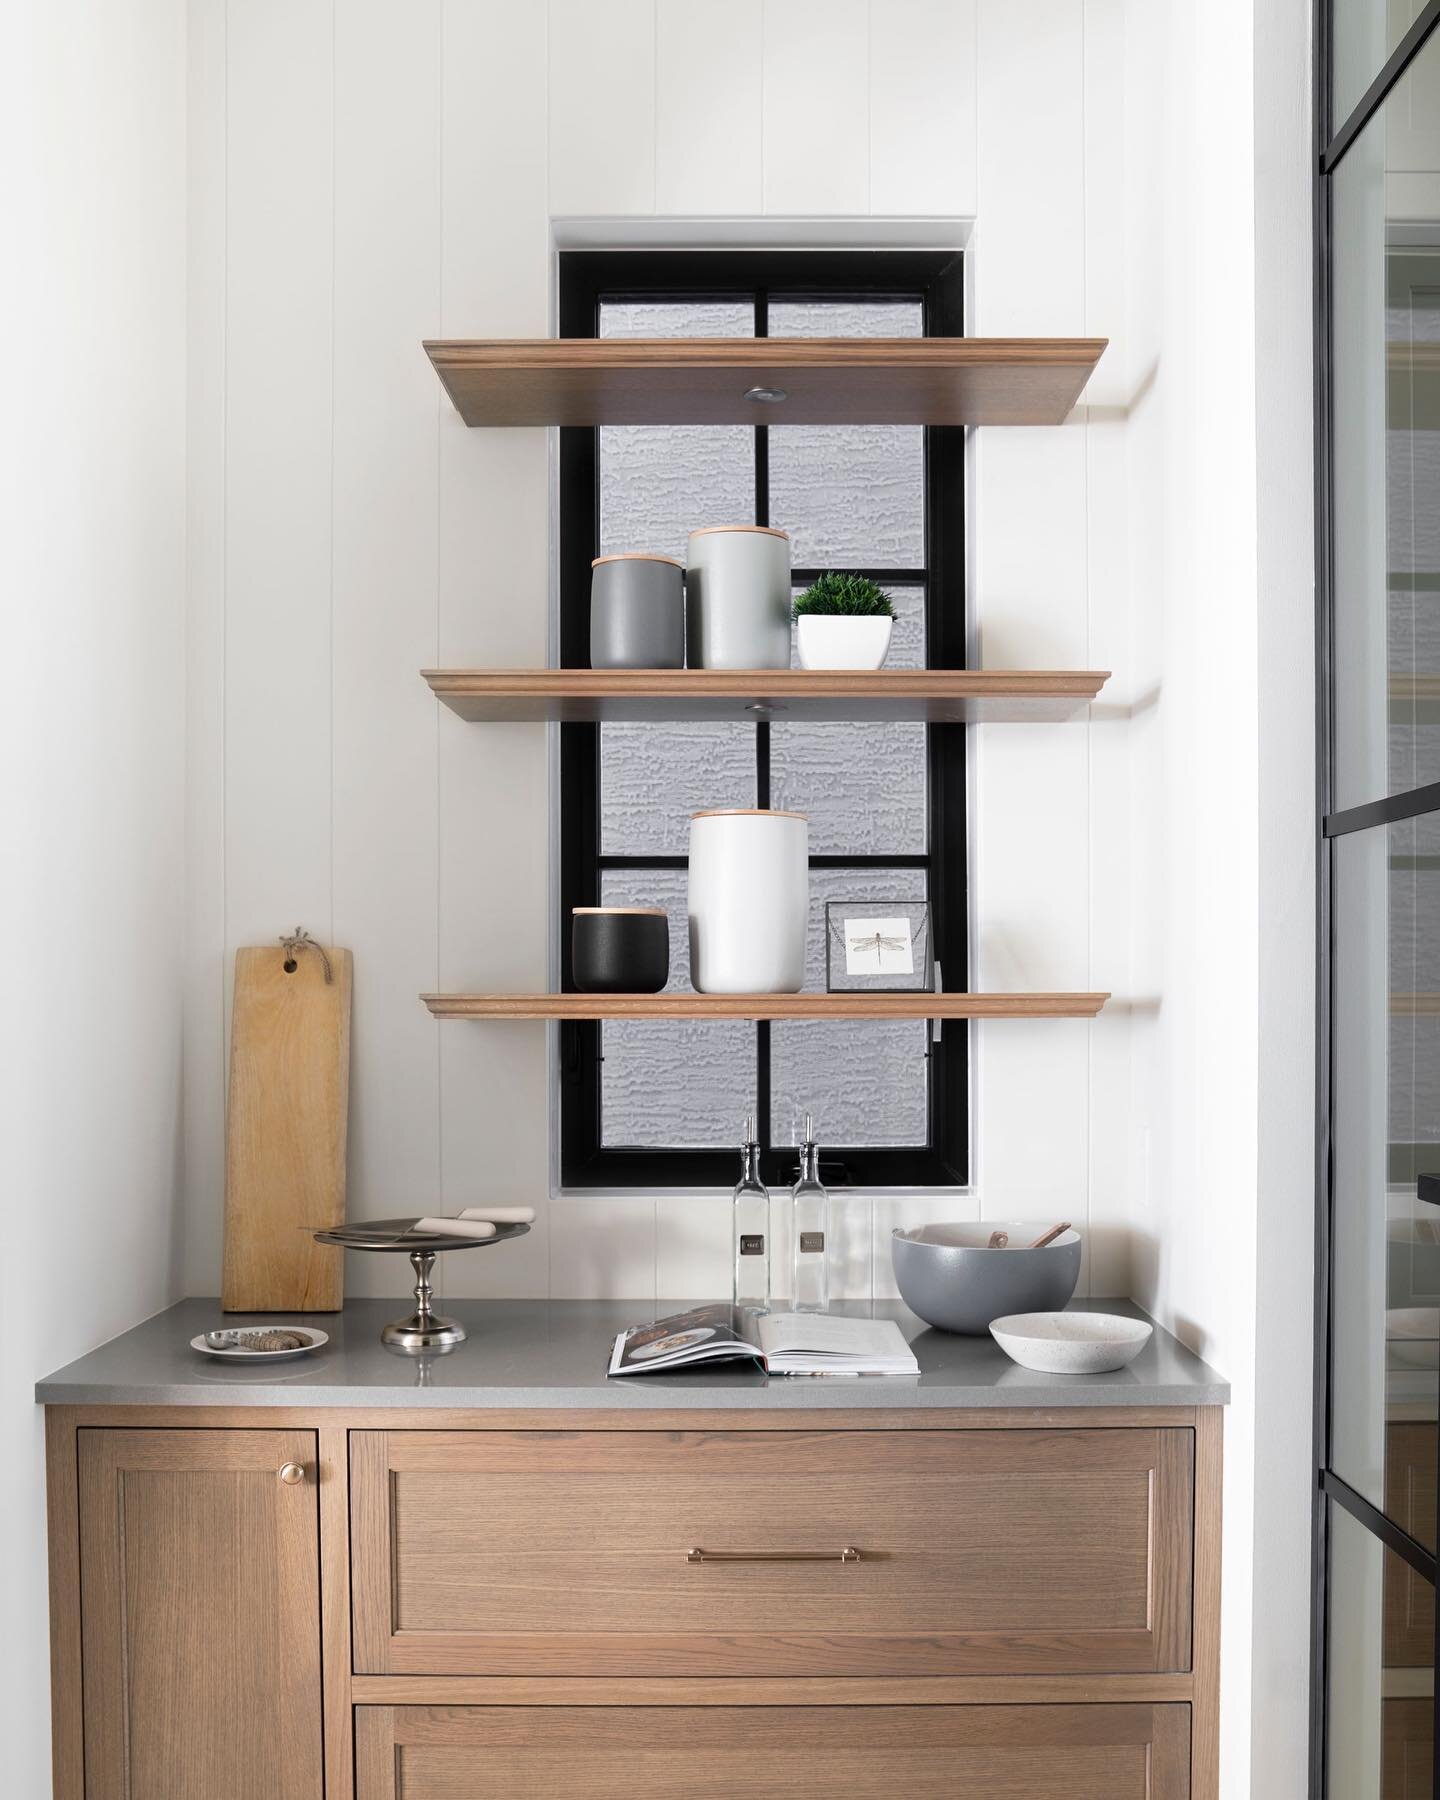 Floating shelves have never looked so good as they do in this butler pantry #semarineproject 

Interior design: @smithericksondesigns 
Design &amp; Build: @calbridge_homes 
Photo: @mjay.photography